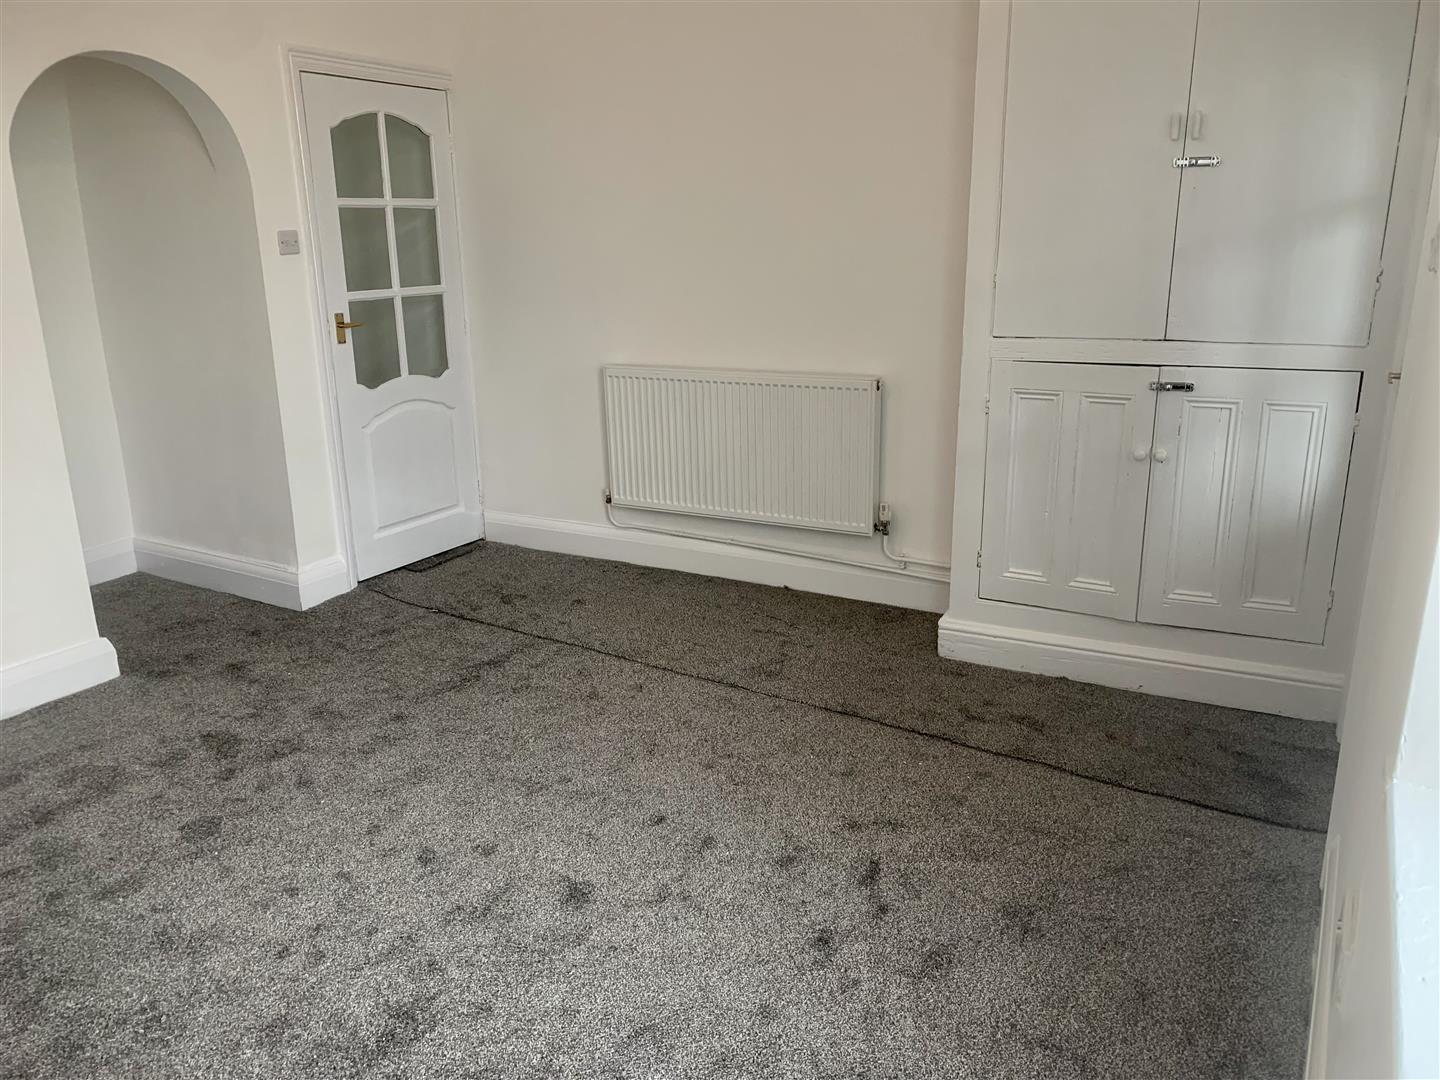 2 bed  to rent in Bolsover  - Property Image 5